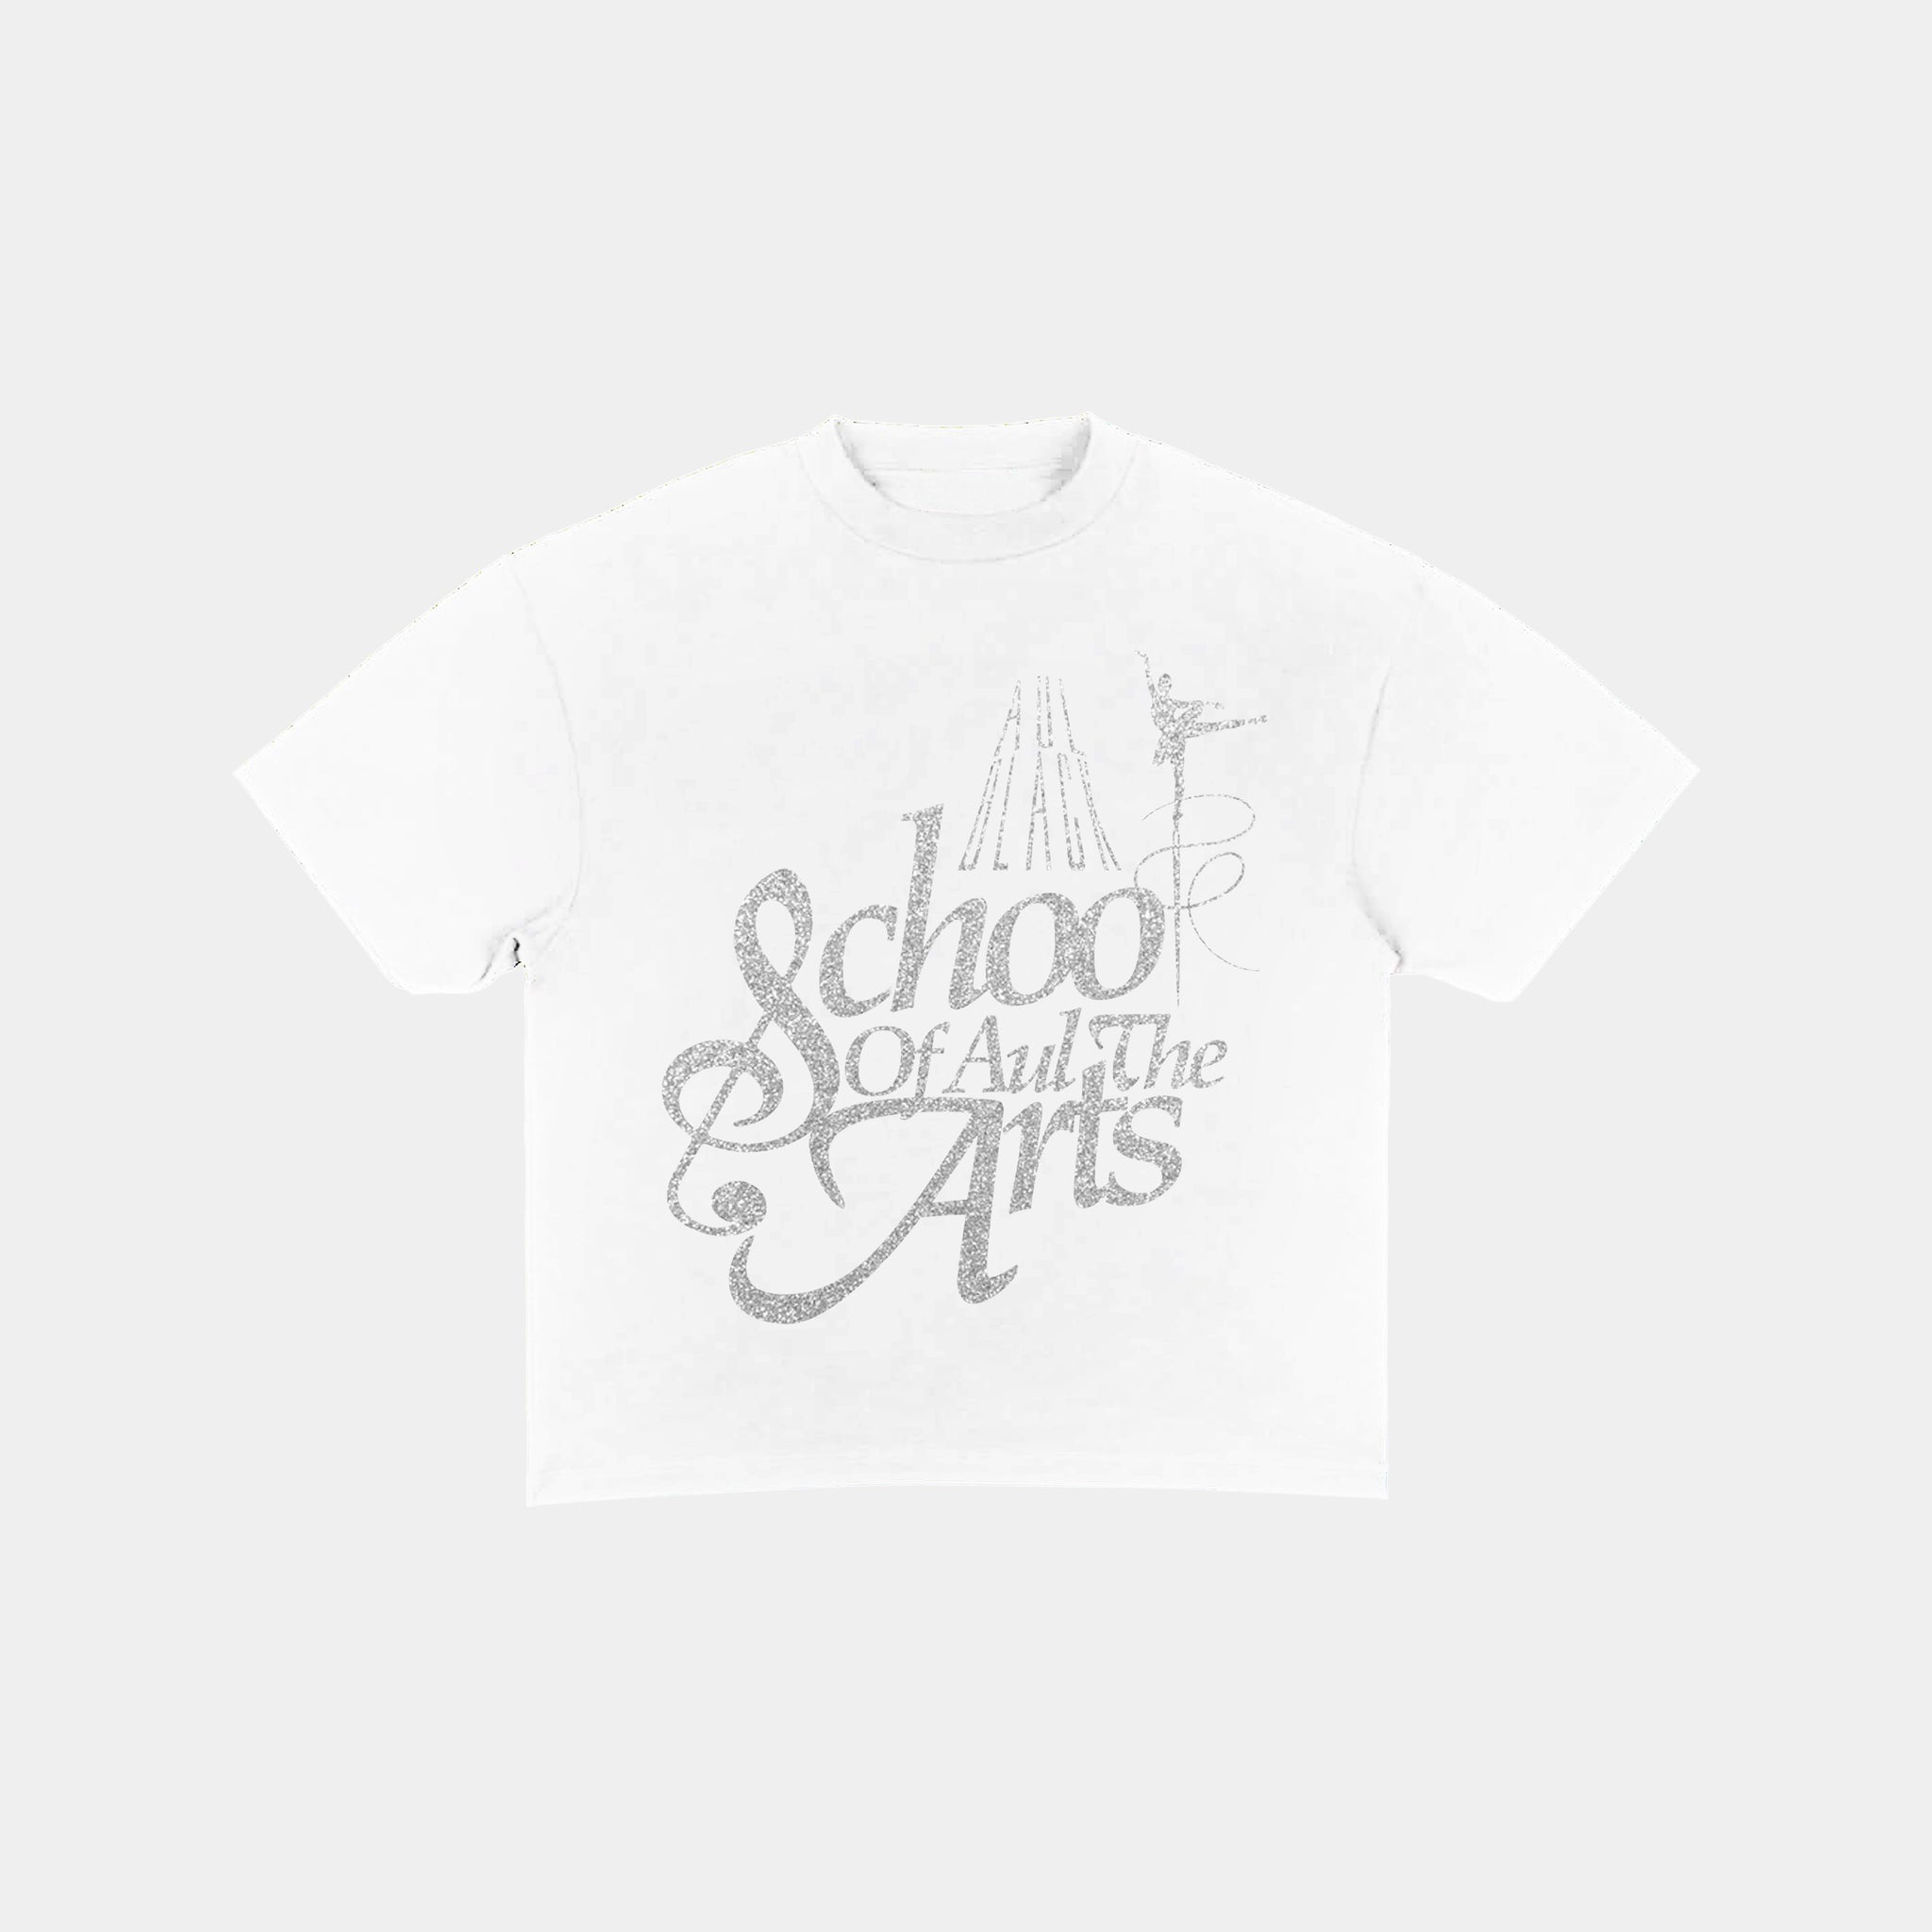 School of Aul the Arts Tee in White